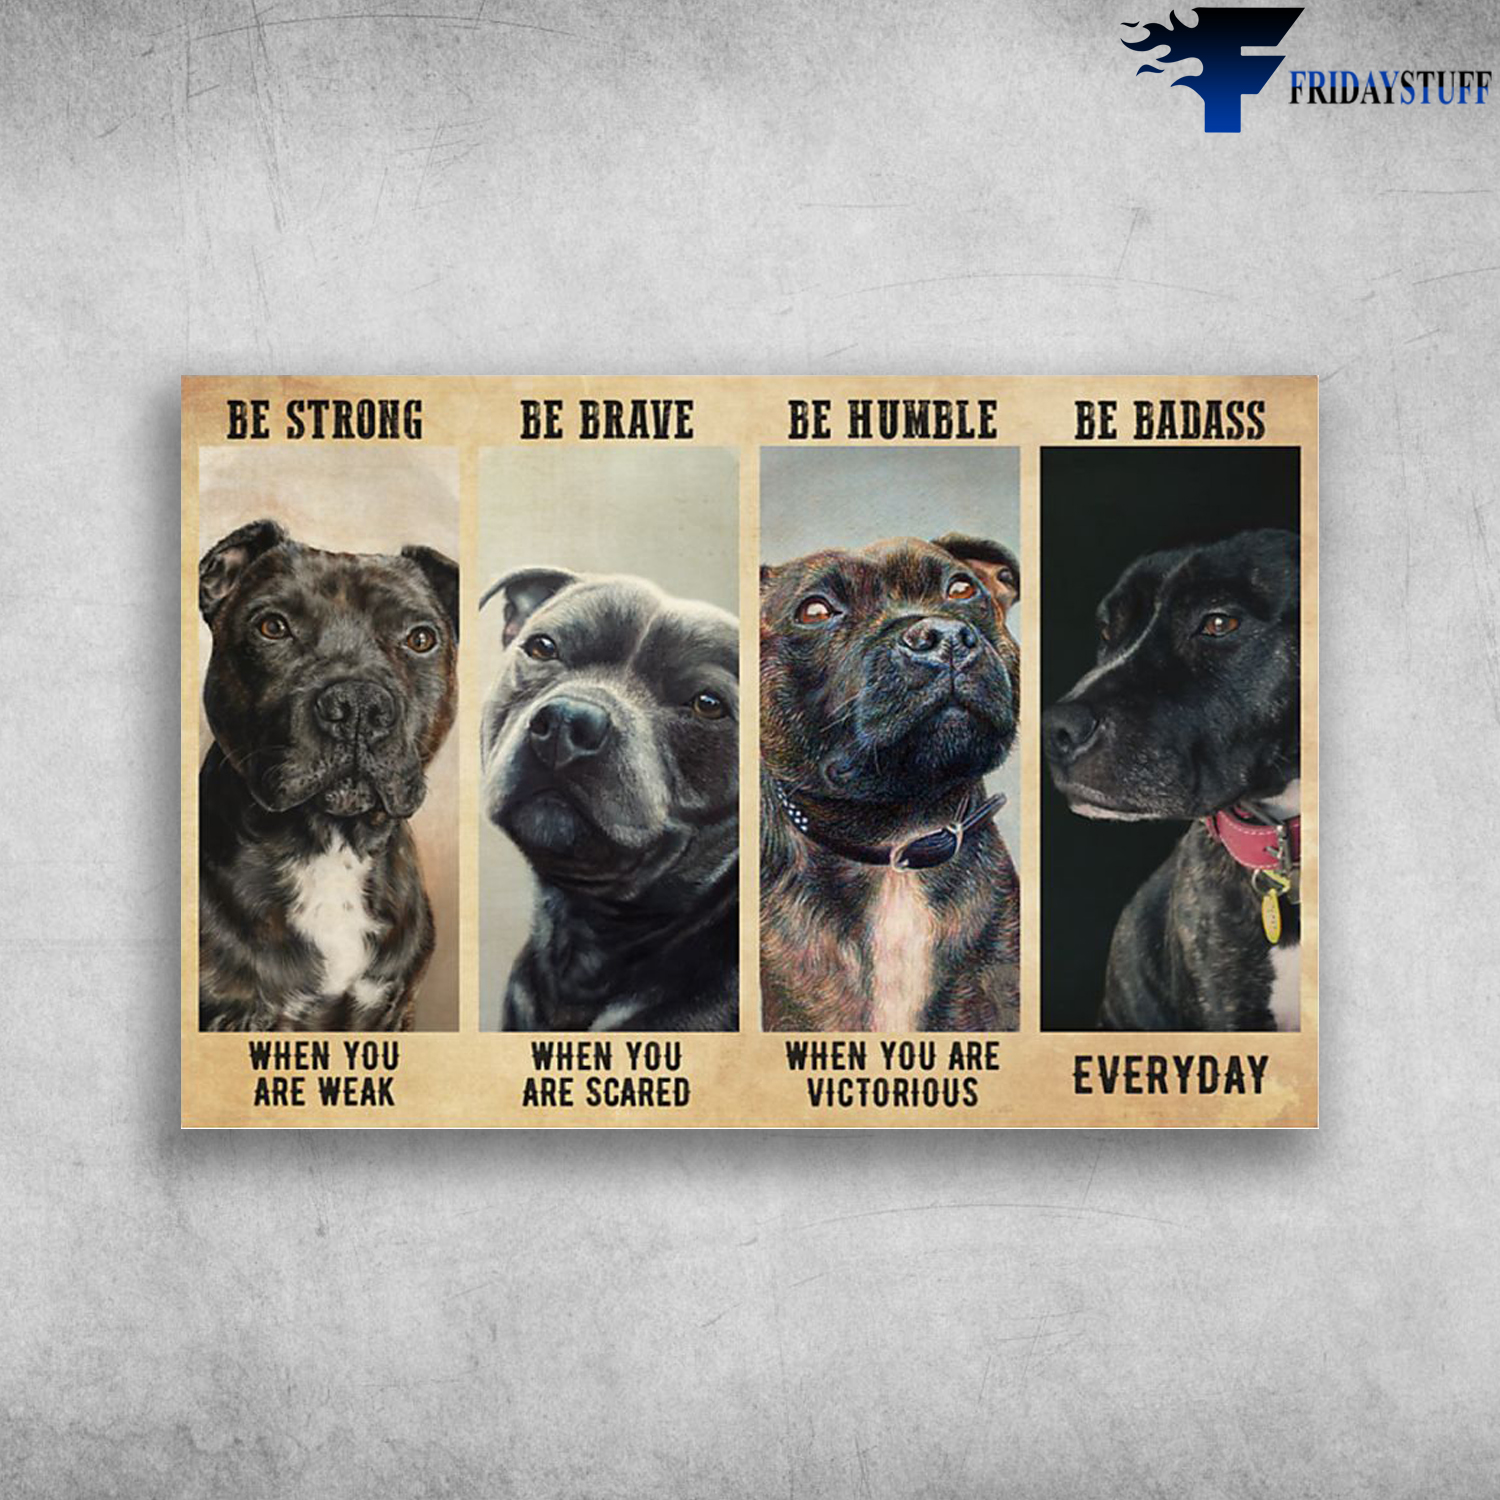 Staffordshire Bull Terrier - Be Strong When You Are Weak, Be Brave When You Are Scared, Be Humble When You Are Victorious, Be Badass Everyday